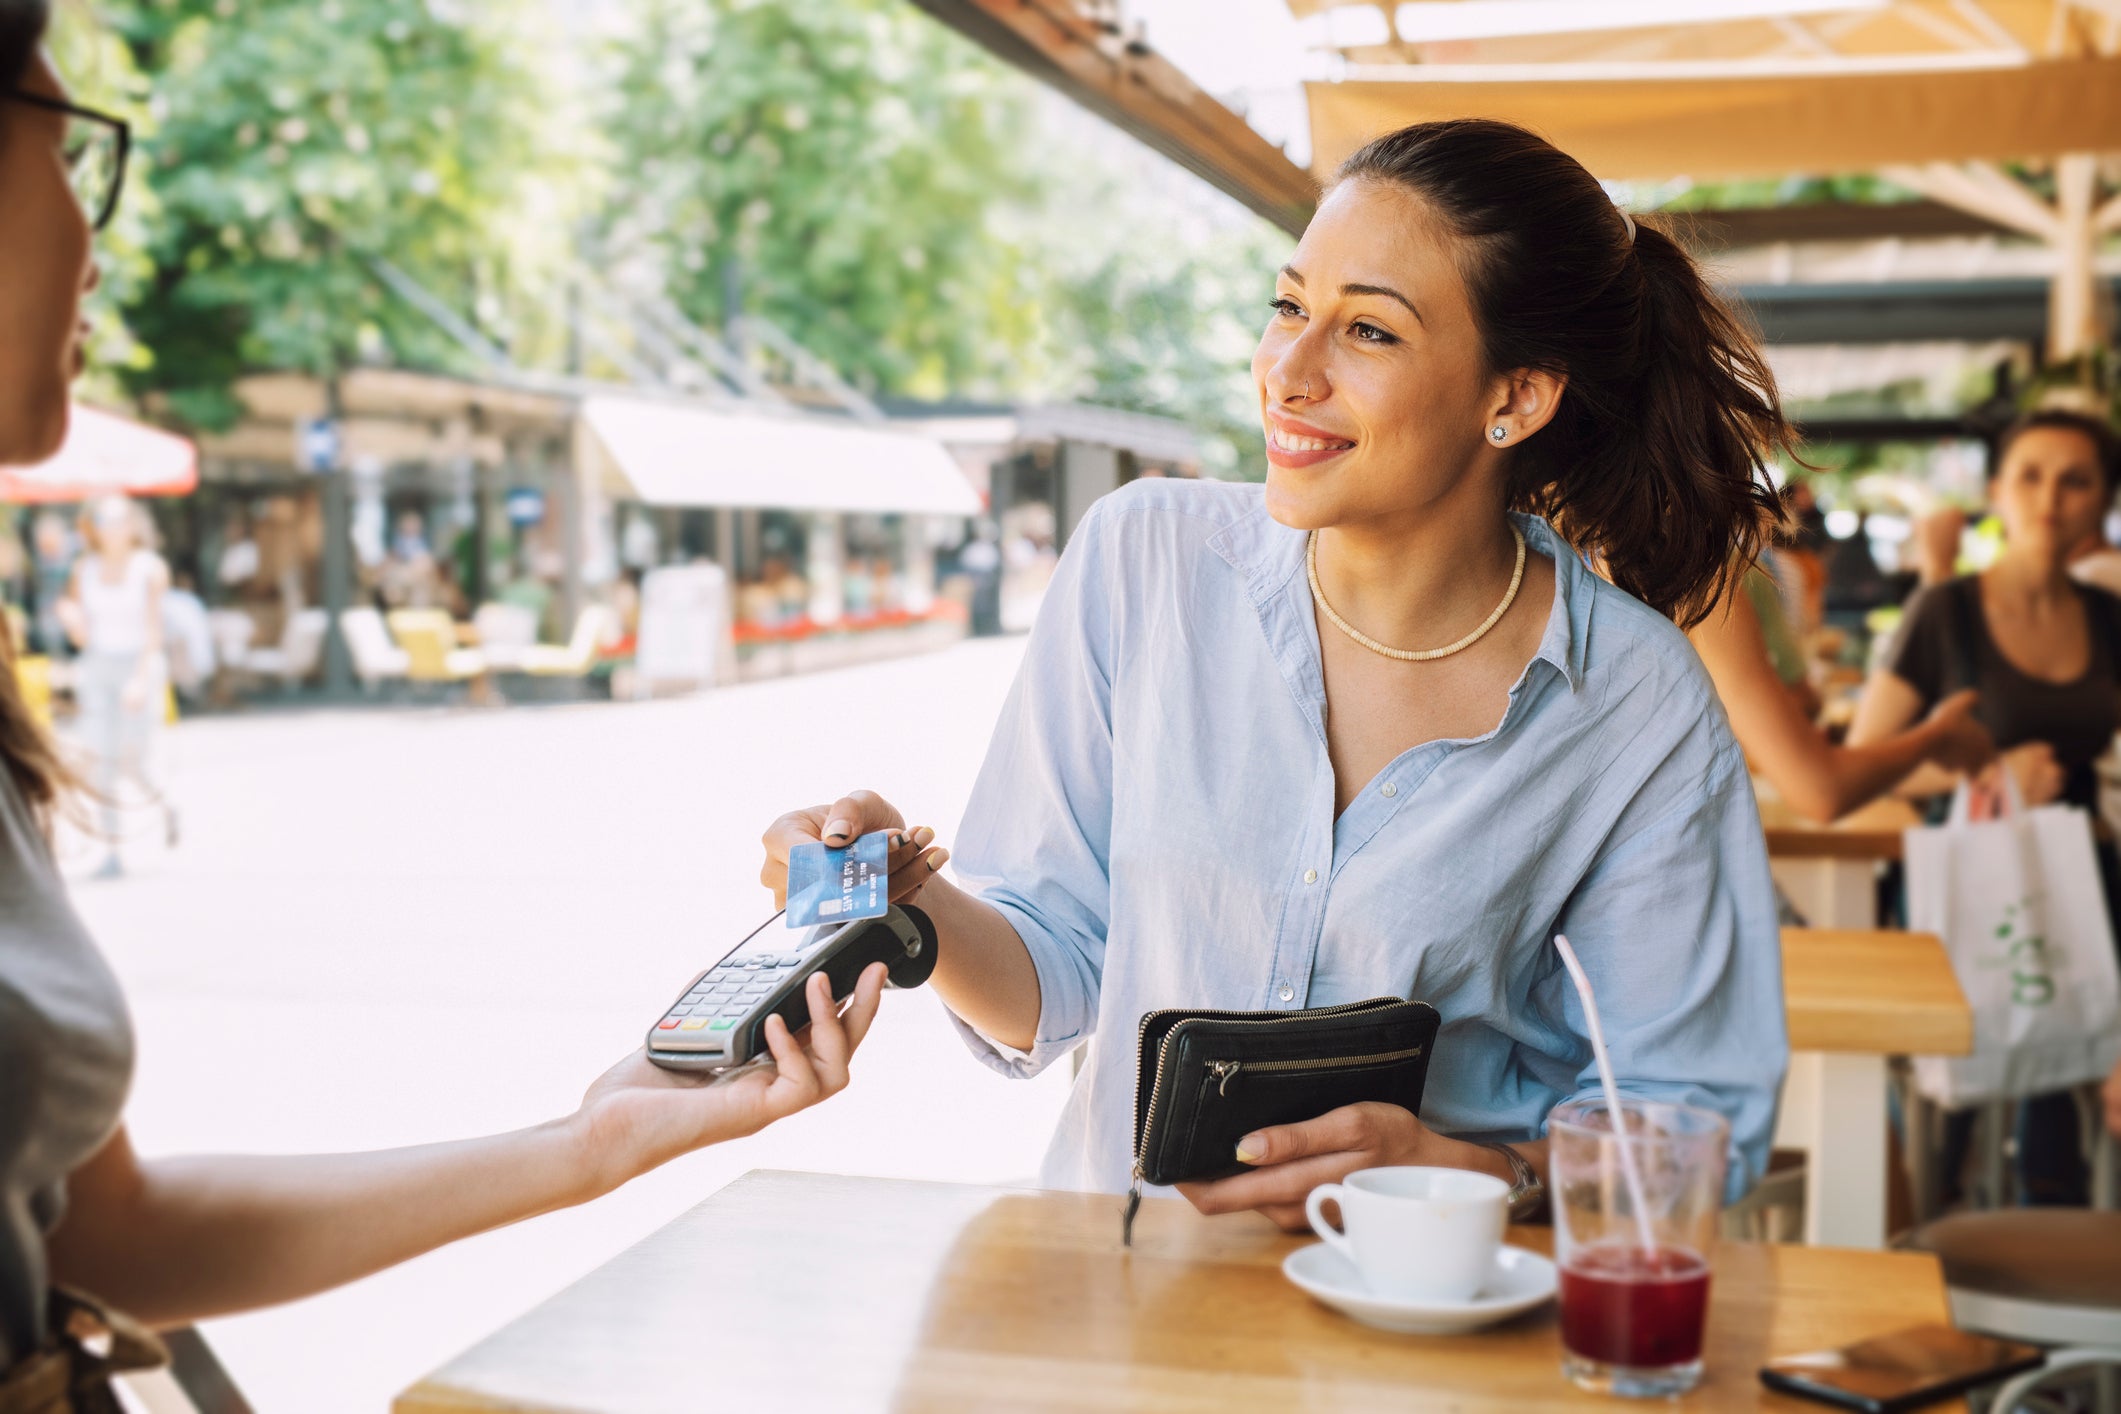 Smiling woman pays for cafe using credit card ArtistGNDphotography